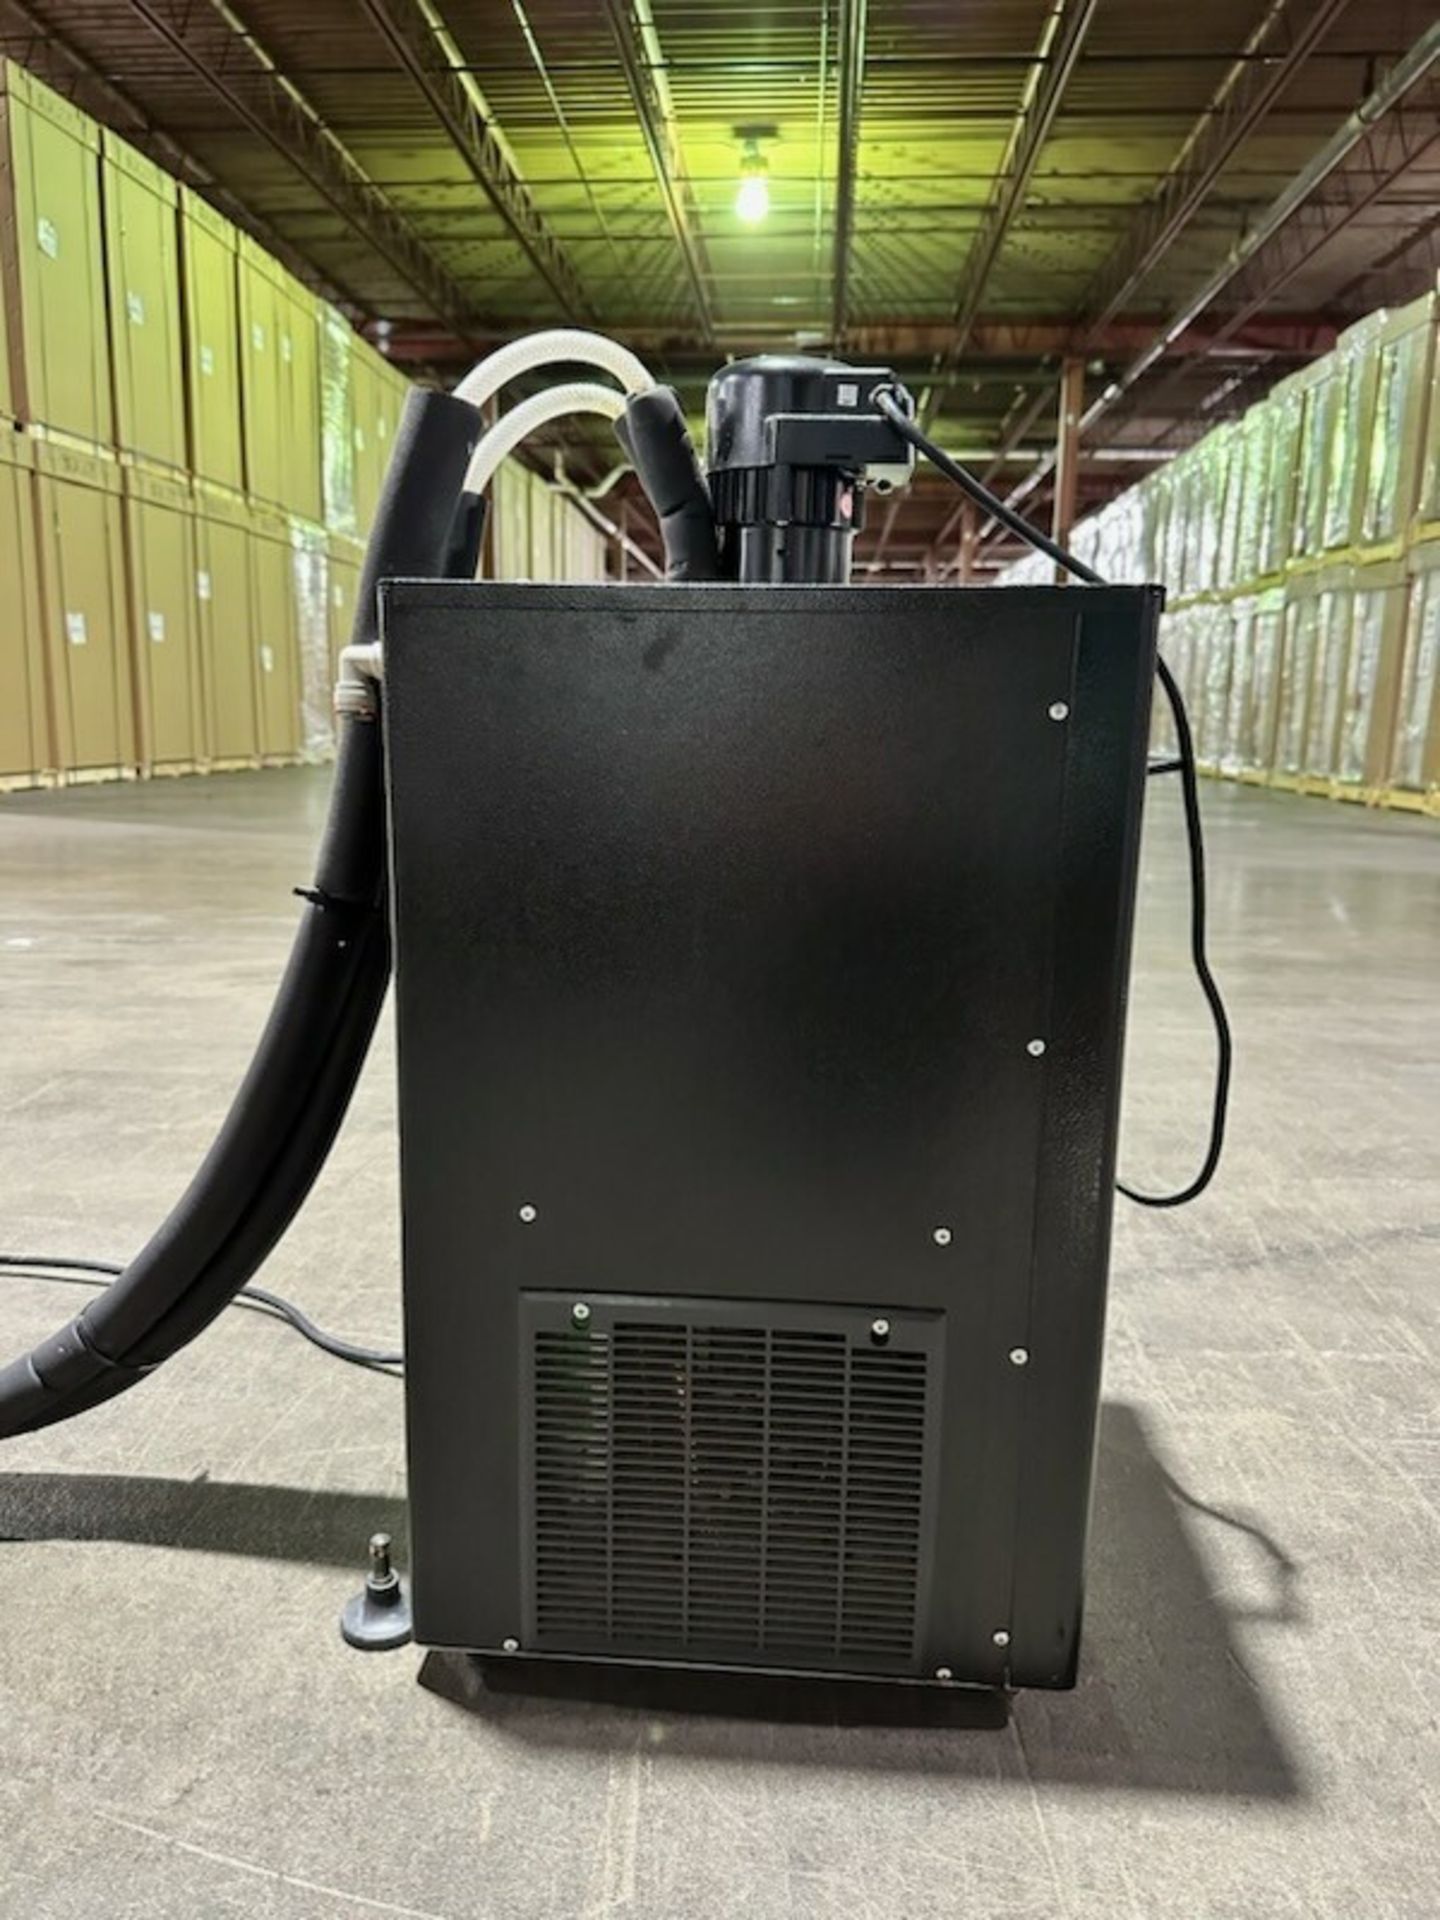 Lot of (1) Used UBC Group Glycol Chiller.Model TAYFUN H-75G-VP & (1) Used Scientific 710 Terp Trap - Image 5 of 7